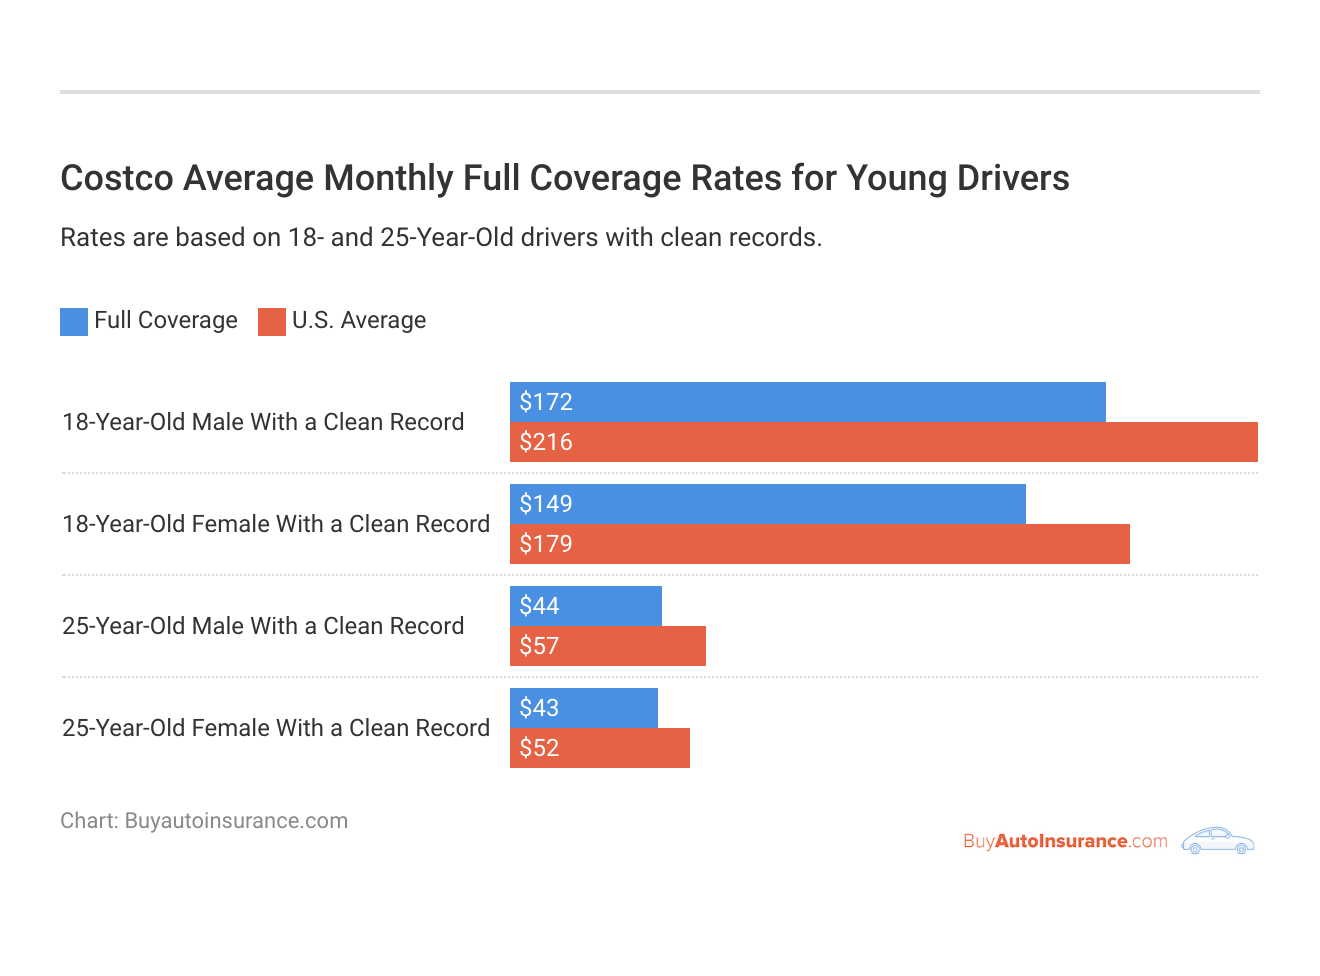 <h3>Costco Average Monthly Full Coverage Rates for Young Drivers</h3>